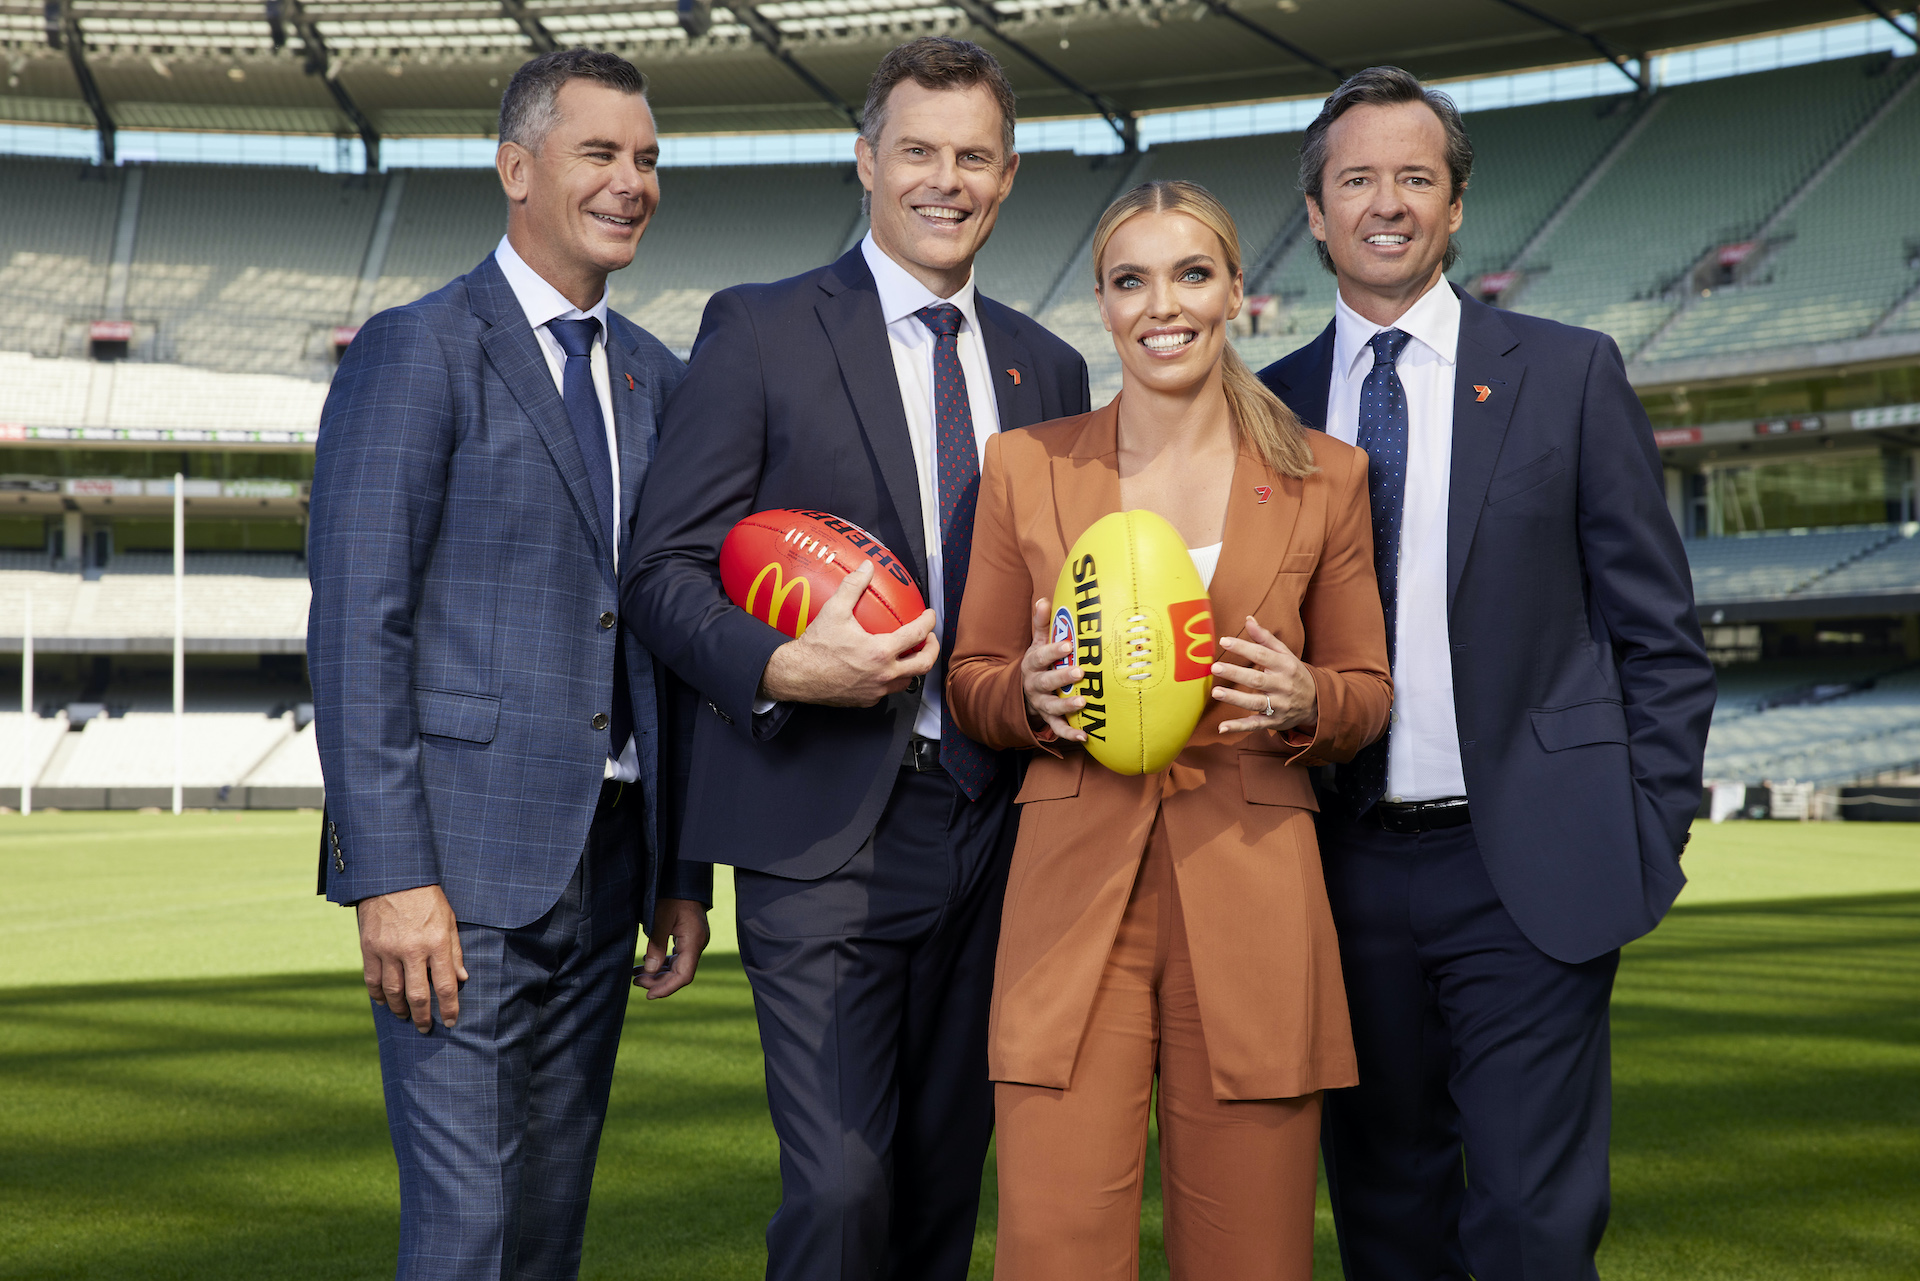 Seven's AFL commentary team of Wayne